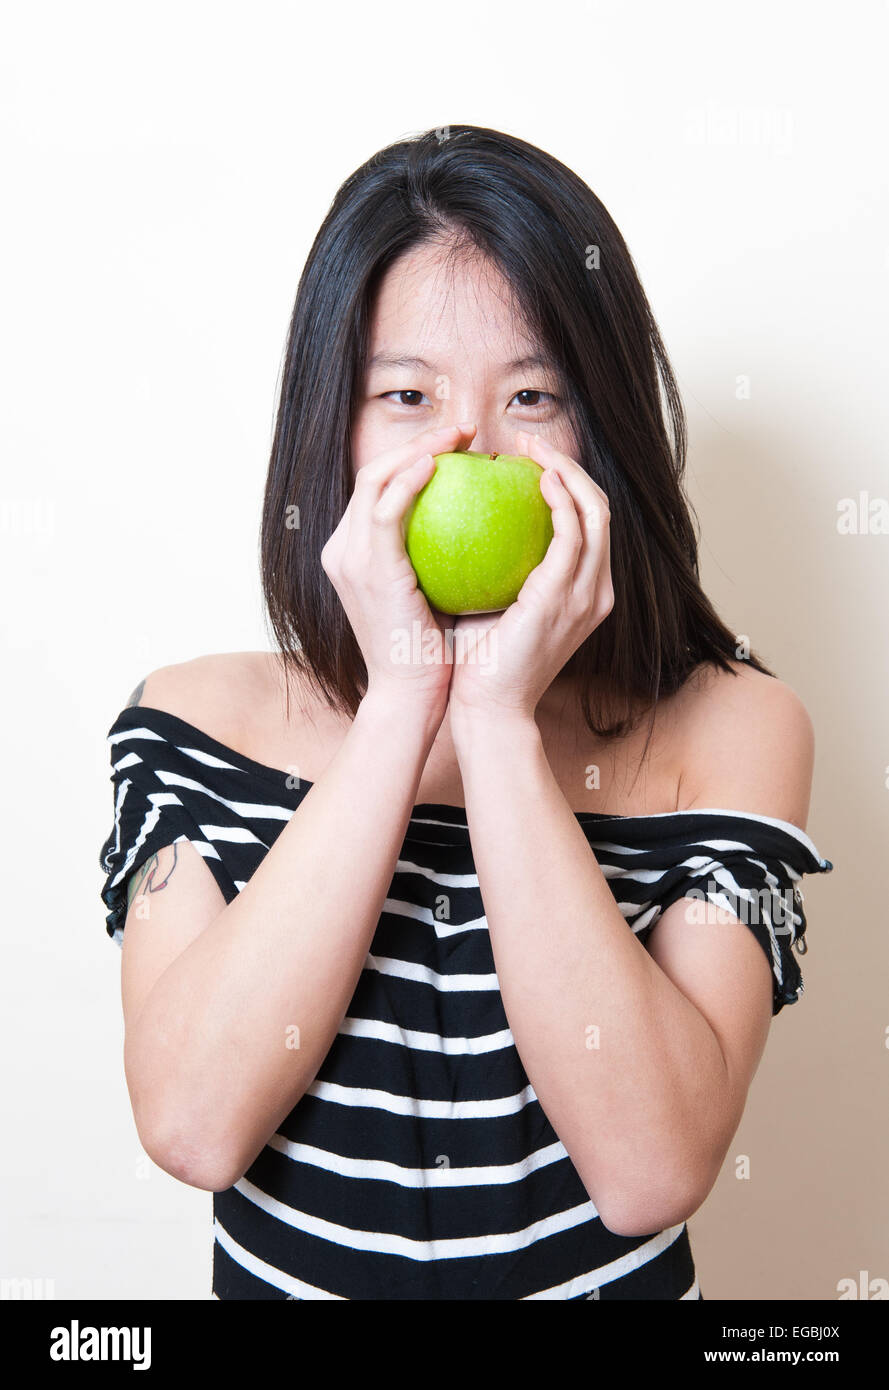 Young beautiful asian woman portrait smiling with green apple over mouth on white background Stock Photo